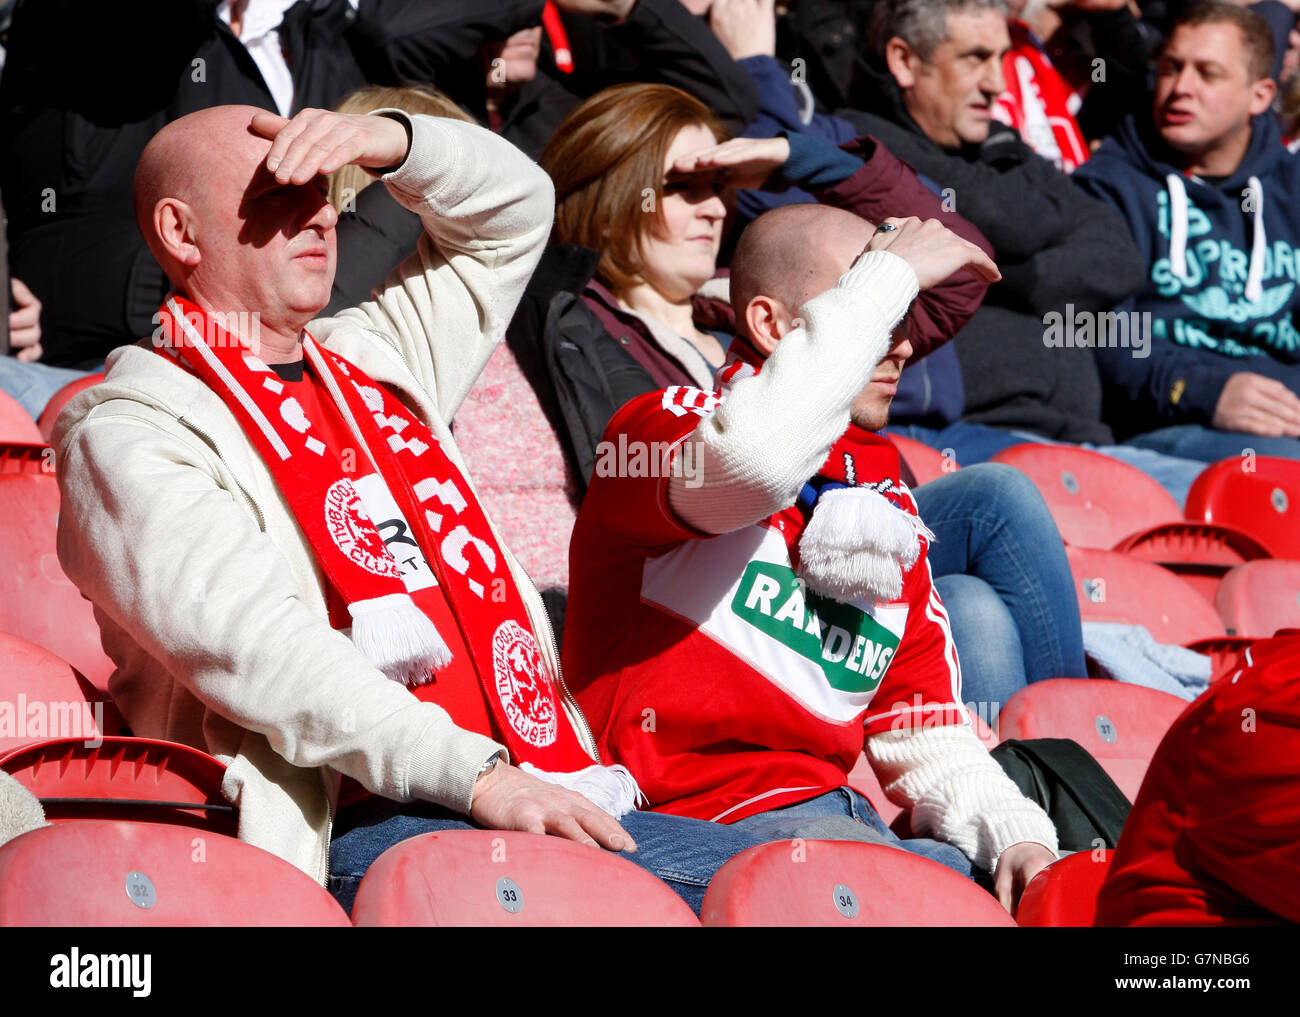 Middlesbrough fans struggle to watch in the bright sun light during the Sky Bet Championship match at the Riverside Stadium, Middlesbrough. Stock Photo